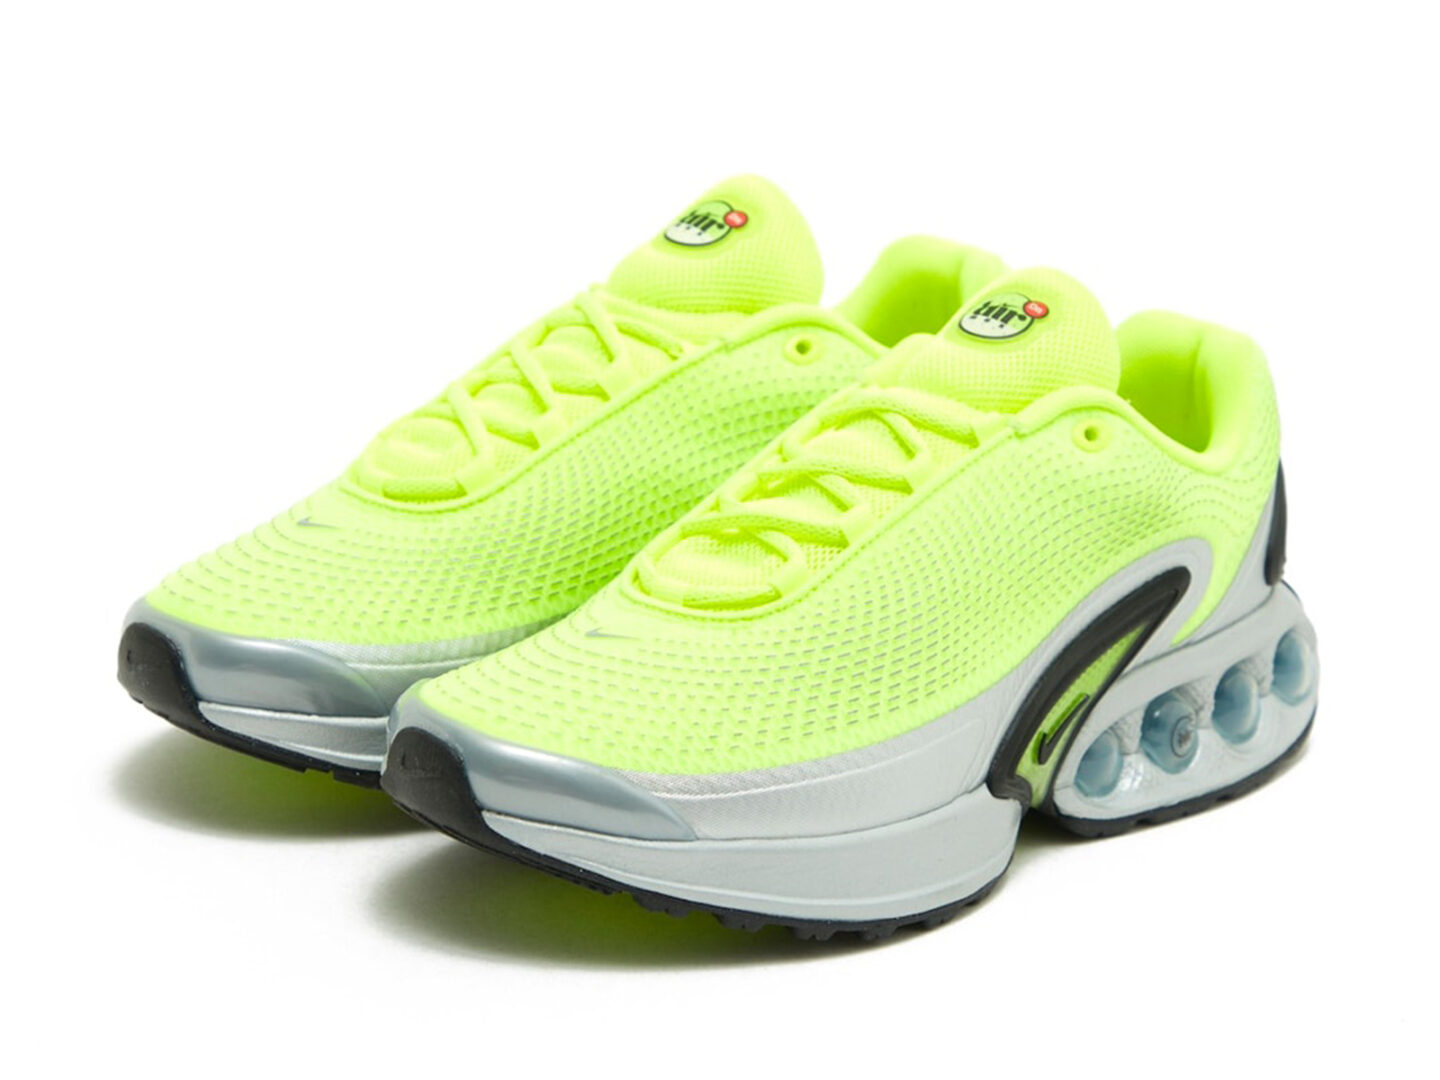 All the details about the Nike Air Max DN ‘Volt’